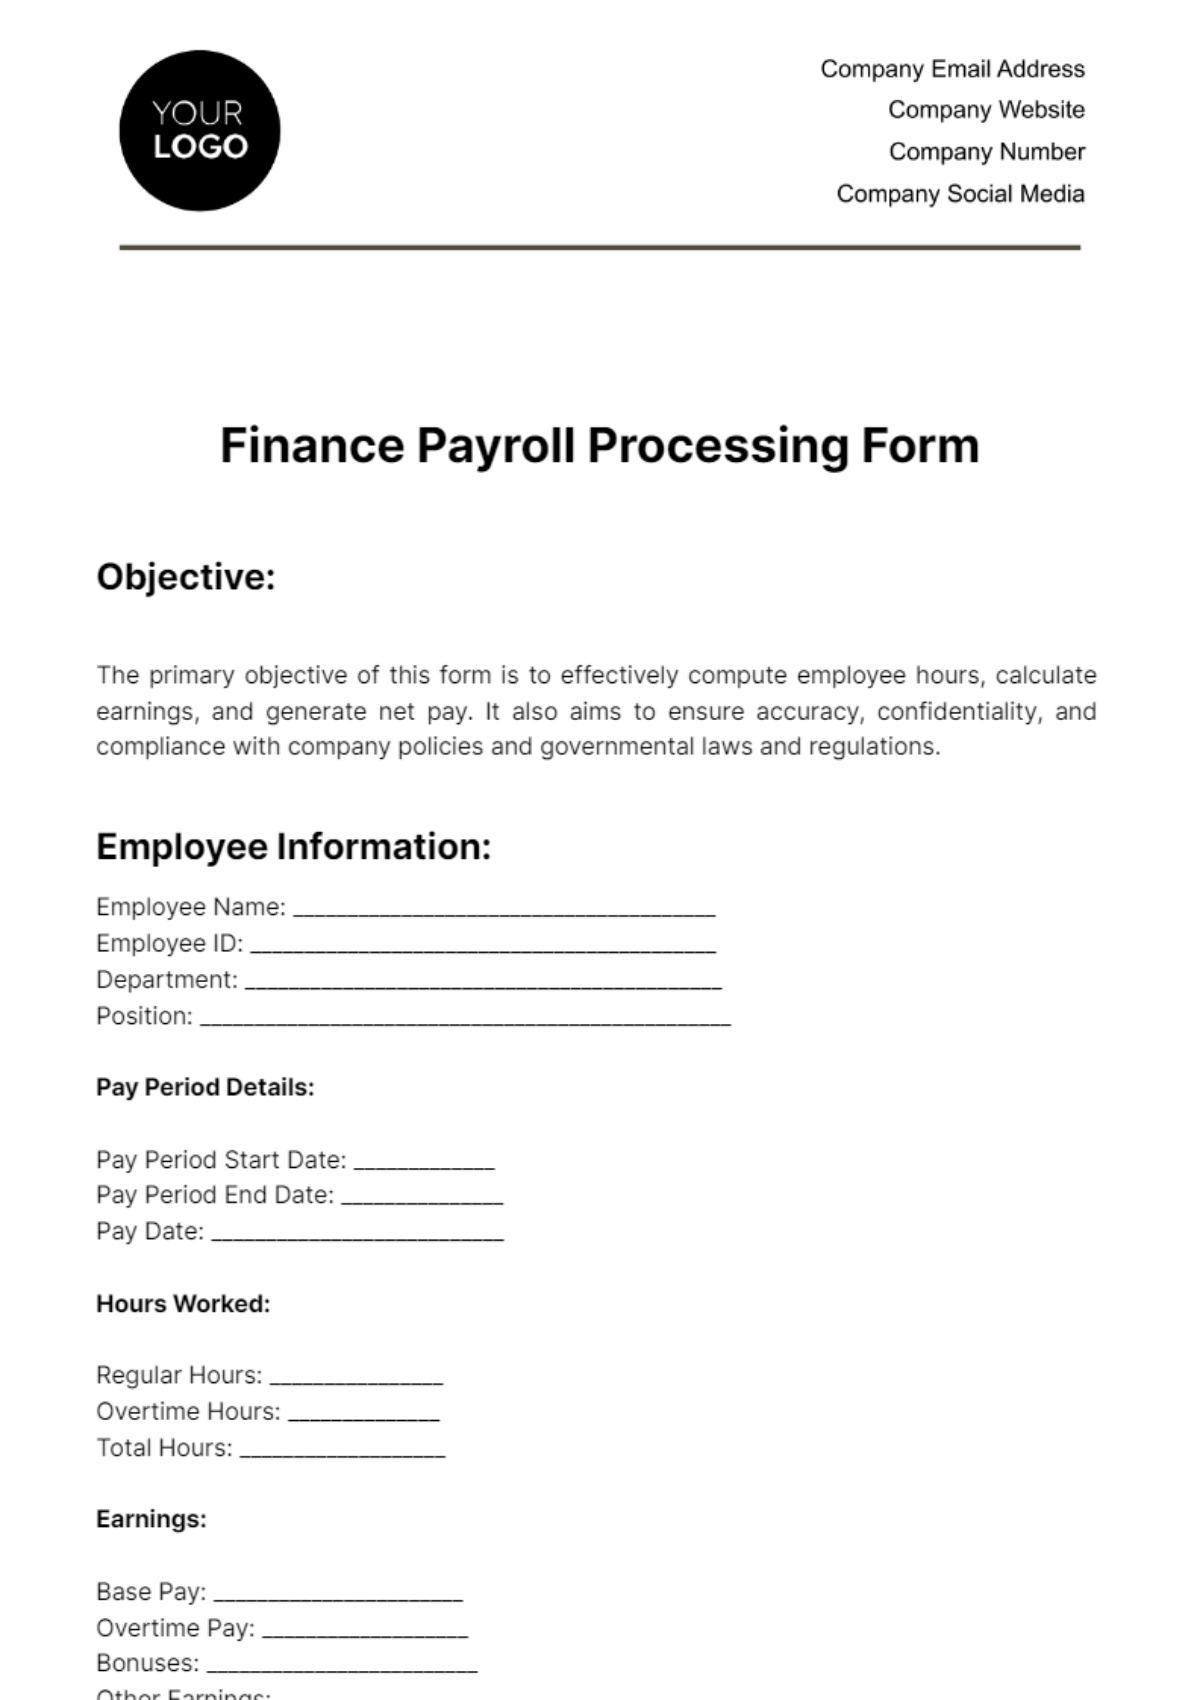 Free Finance Payroll Processing Form Template